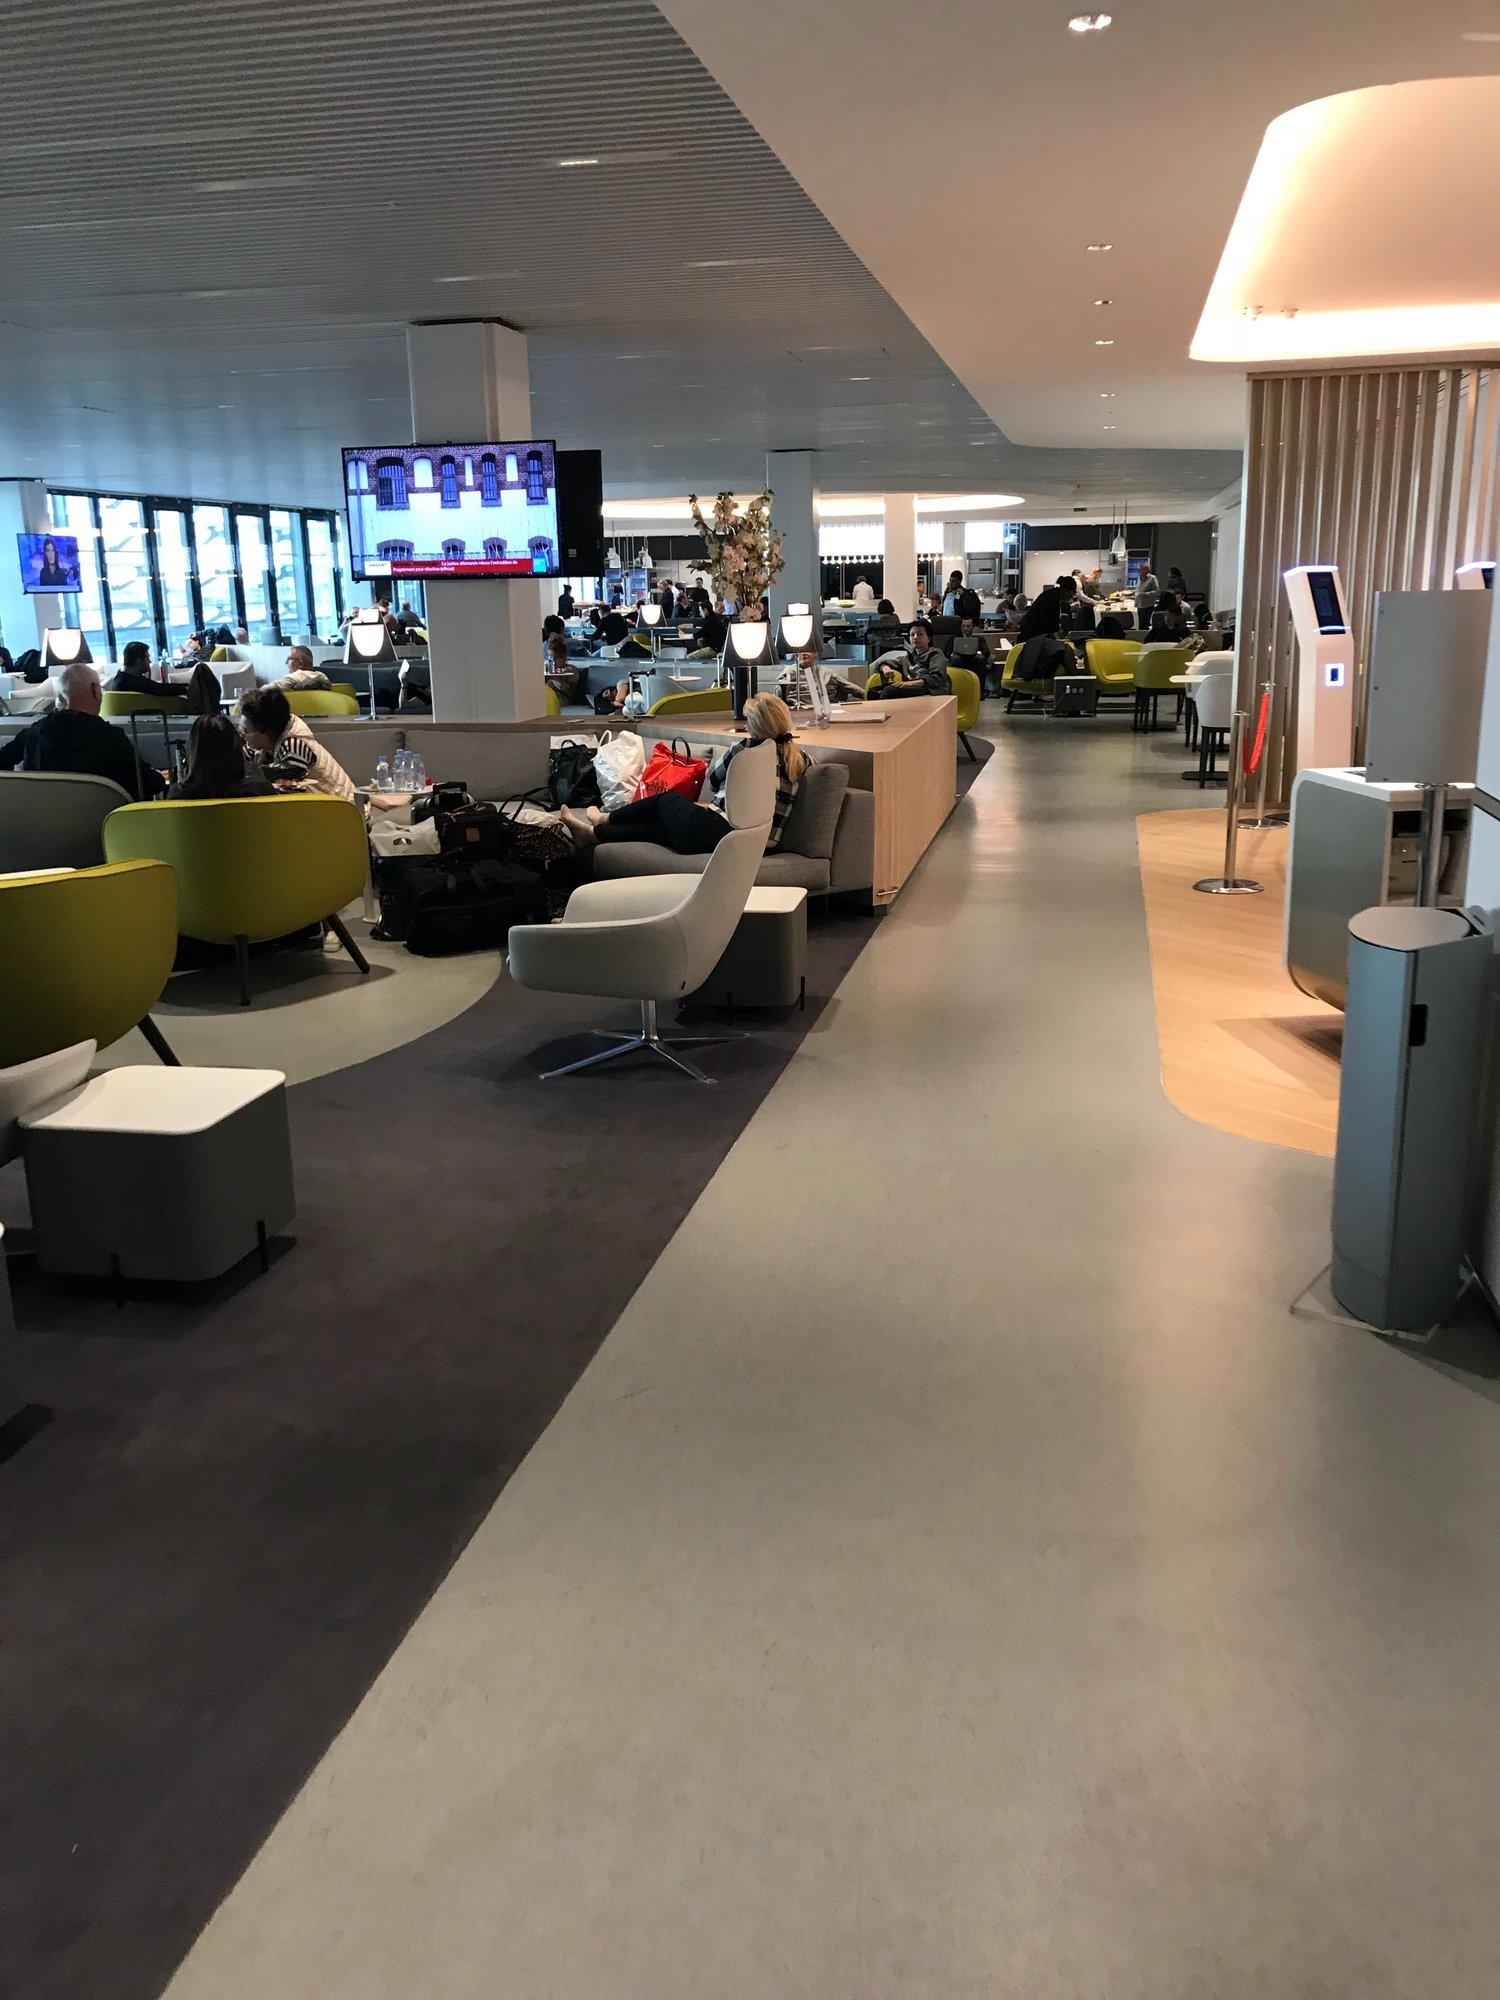 Air France Lounge (Concourse L) image 5 of 57